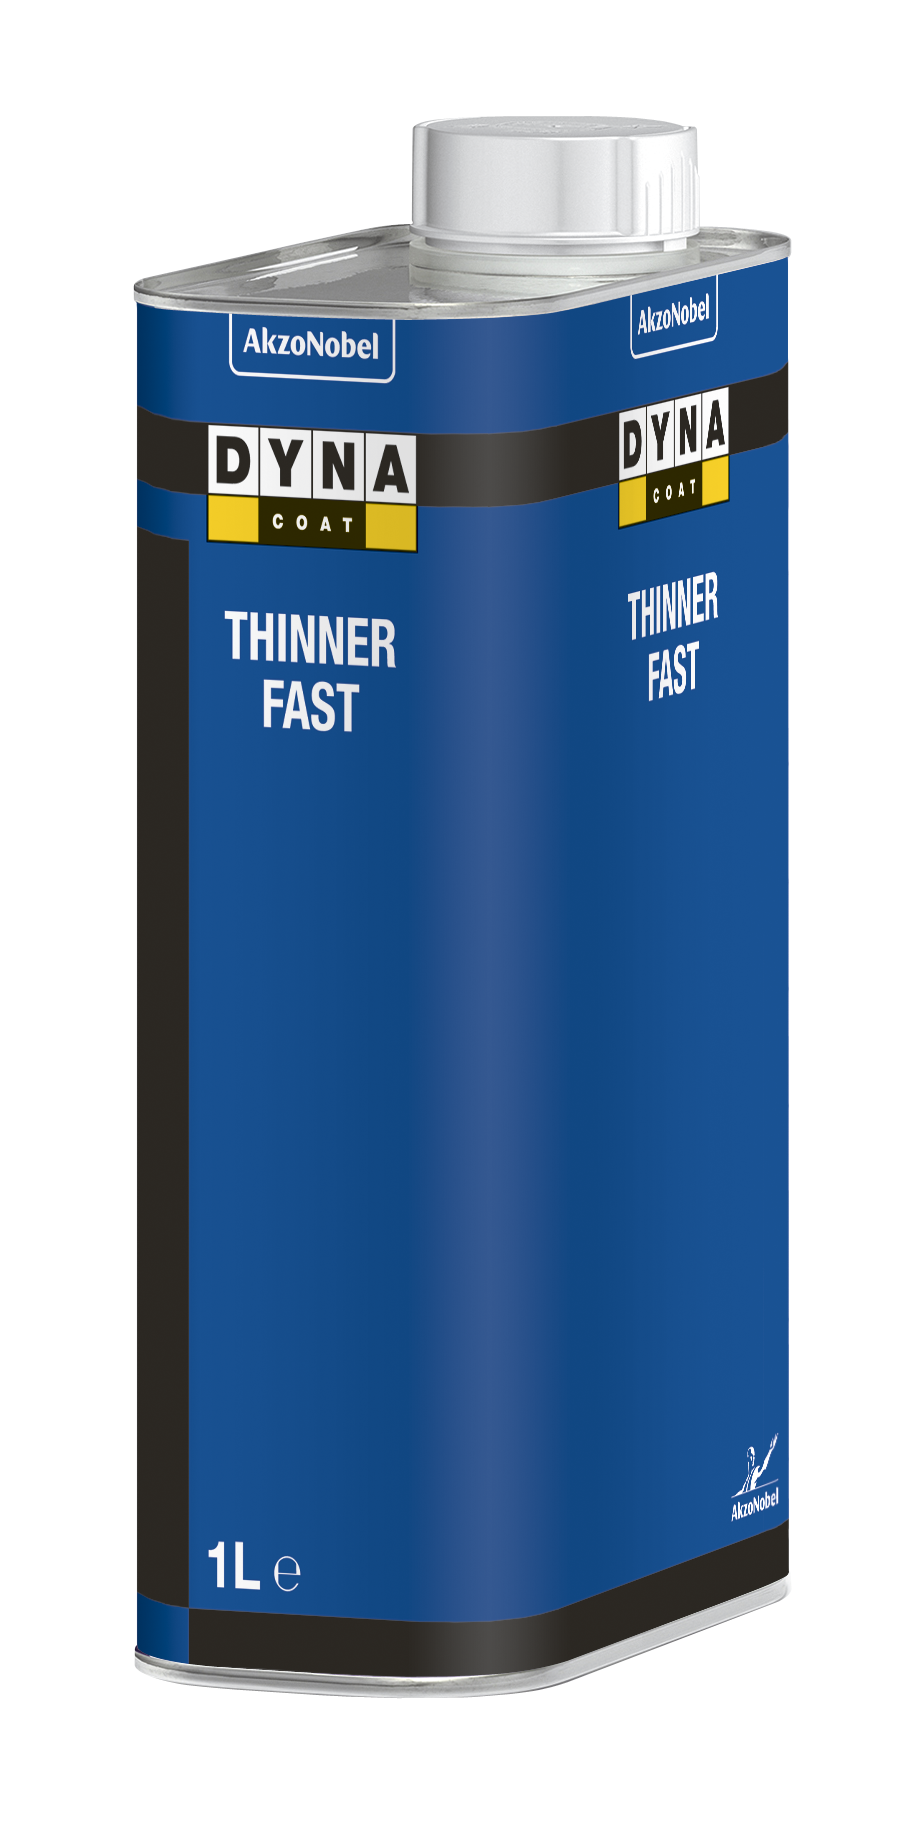 Thinner fast. Лак Dynacoat Clear 6000hs. Лак Dynacoat 1500. Dyna HS лак 1л. Dynacoat лак Clear 6000 HS Antiscratch 5 л..